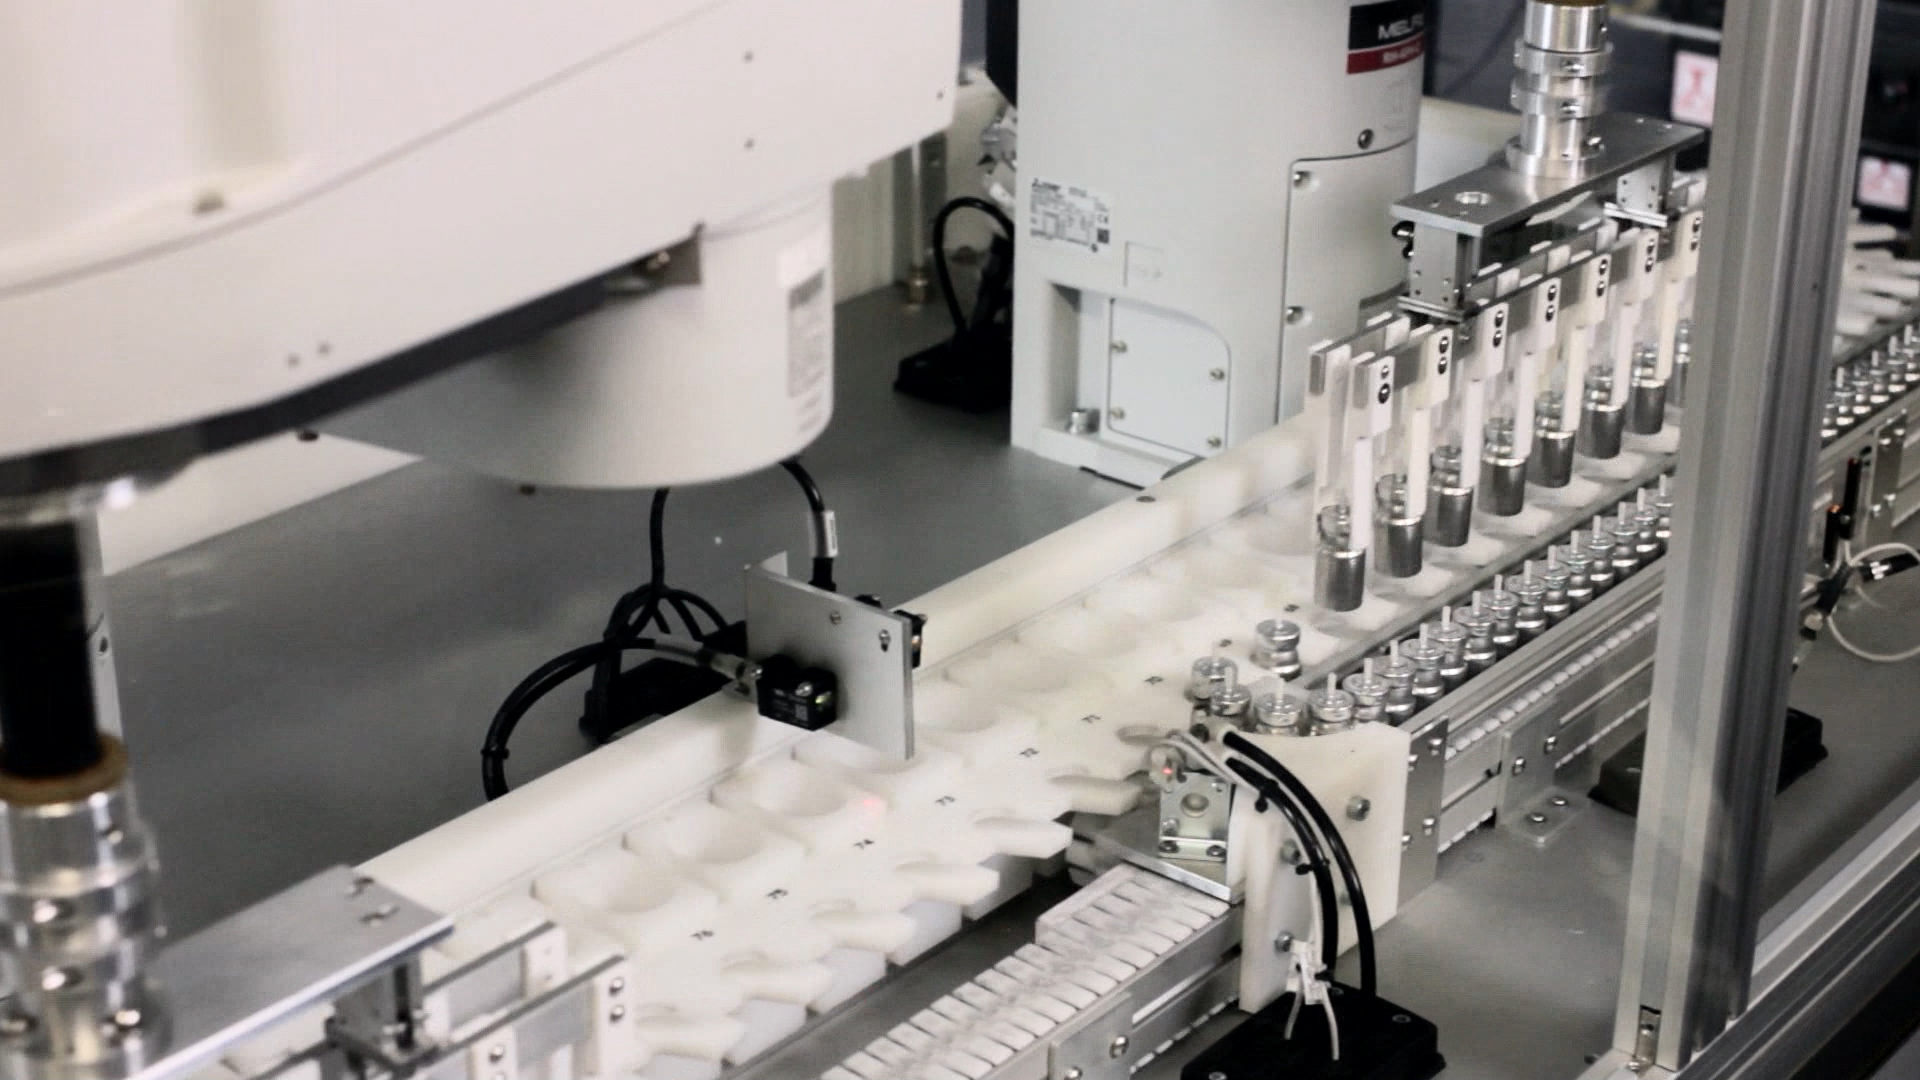 Robots bring greater reliability, consistency and precision to the pharmaceutical laboratory, completing repetitive tasks with great accuracy and helping to protect sterile environments from contamination.